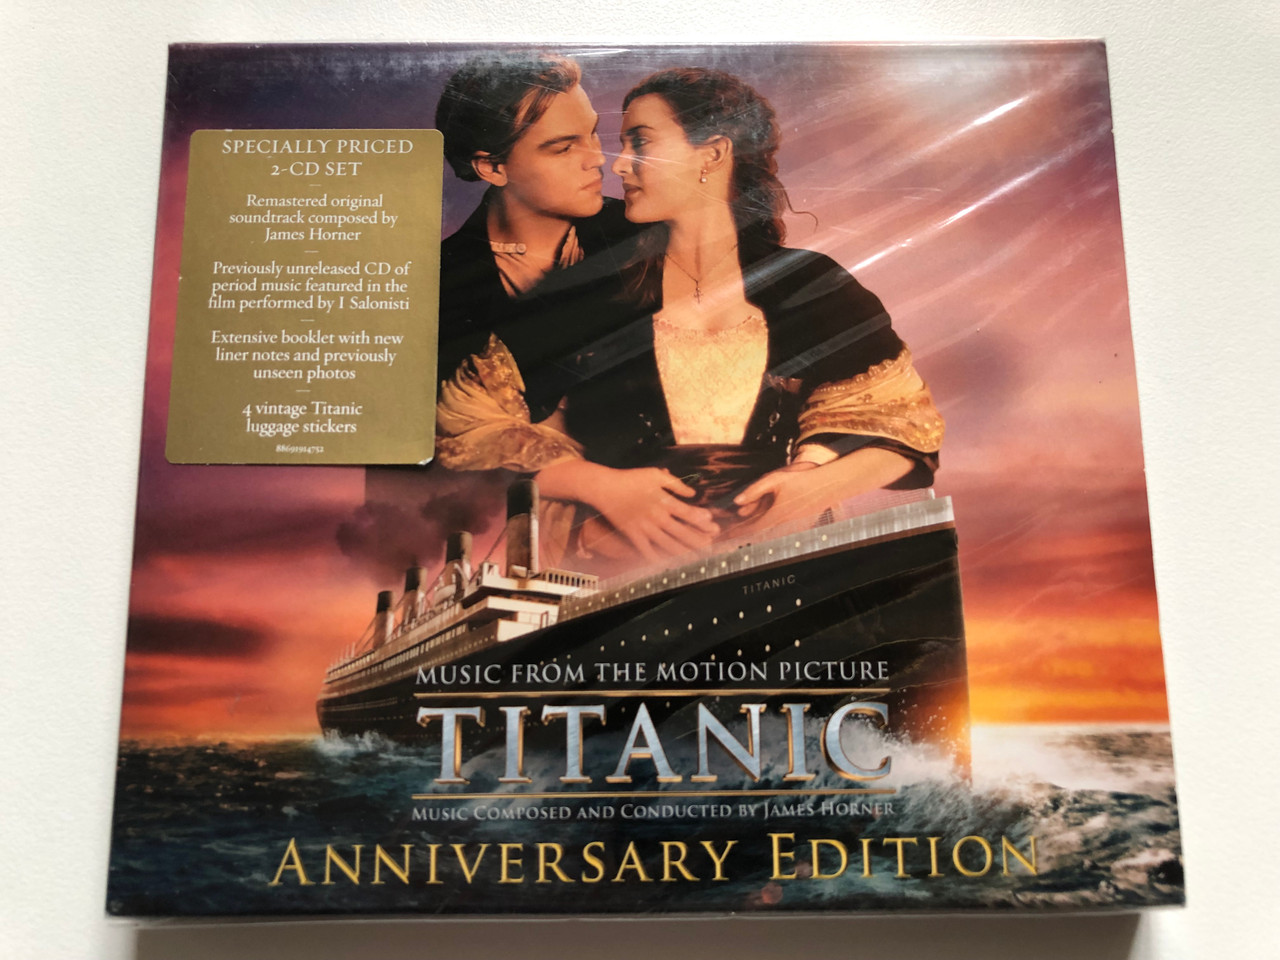 https://cdn10.bigcommerce.com/s-62bdpkt7pb/products/0/images/243550/Titanic_Music_From_The_Motion_Picture_-_Anniversary_Edition_-_Music_Composed_And_Conducted_By_James_Horner_Specially_Priced_2-CD_Set_Masterworks_2x_Audio_CD_2012_88691964242_1__31680.1658999972.1280.1280.JPG?c=2&_gl=1*jfvubq*_ga*MjA2NTIxMjE2MC4xNTkwNTEyNTMy*_ga_WS2VZYPC6G*MTY1ODk5Nzg3OC41MDMuMS4xNjU4OTk5Njc4LjQz